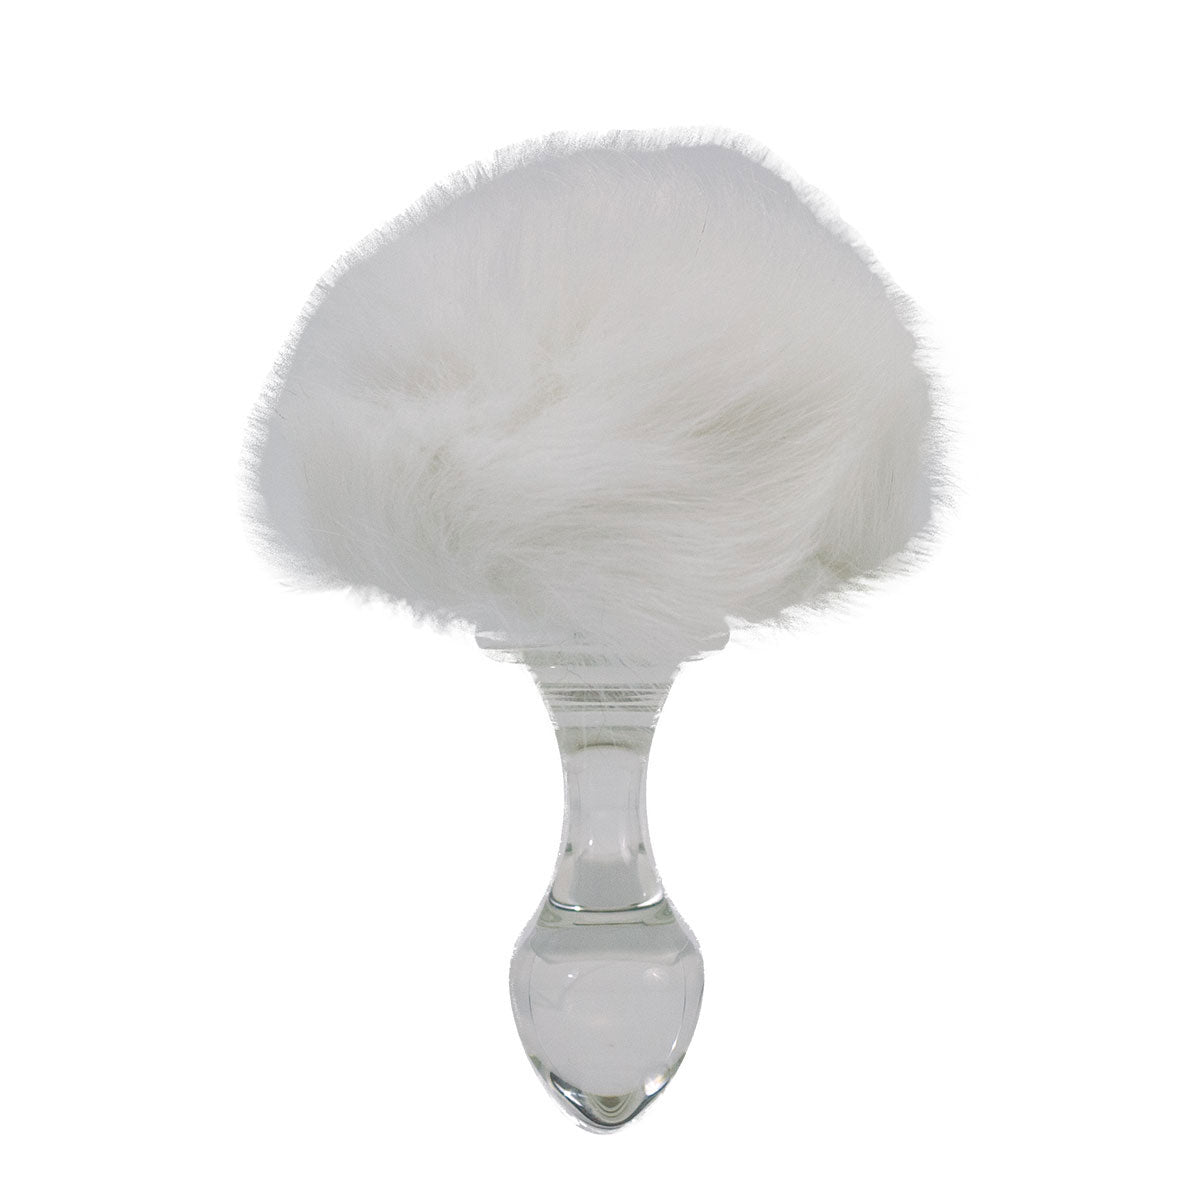 Crystal Delights Magnetic Bunny Tail